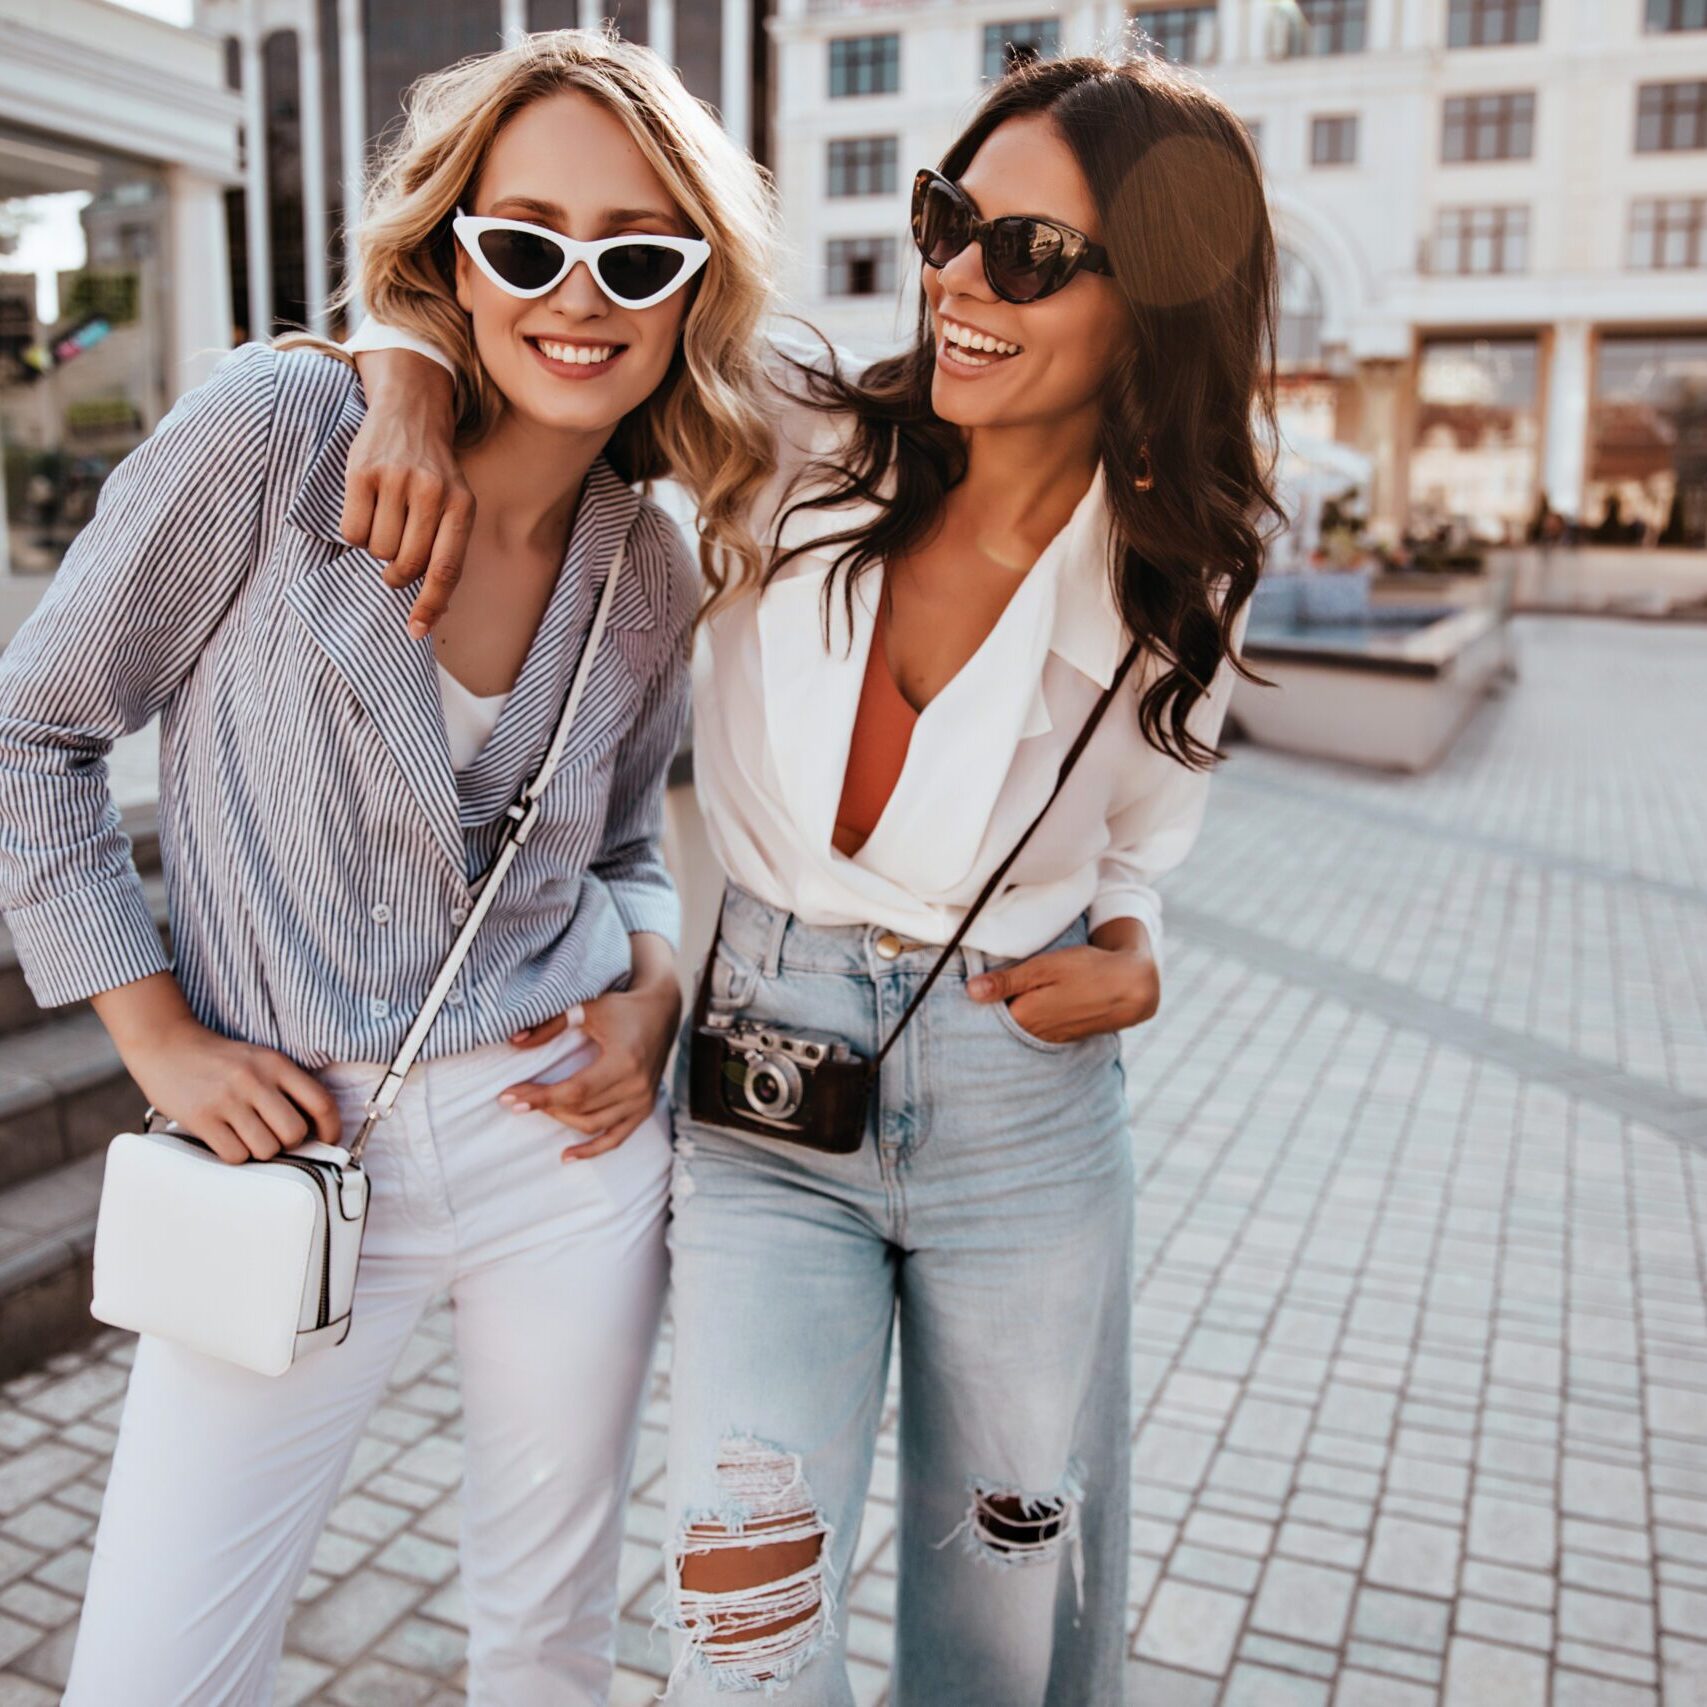 Confident blonde girl in sunglasses enjoying outdoor photoshoot with best friend. Stunning dark-haired female model embracing sister on the street.